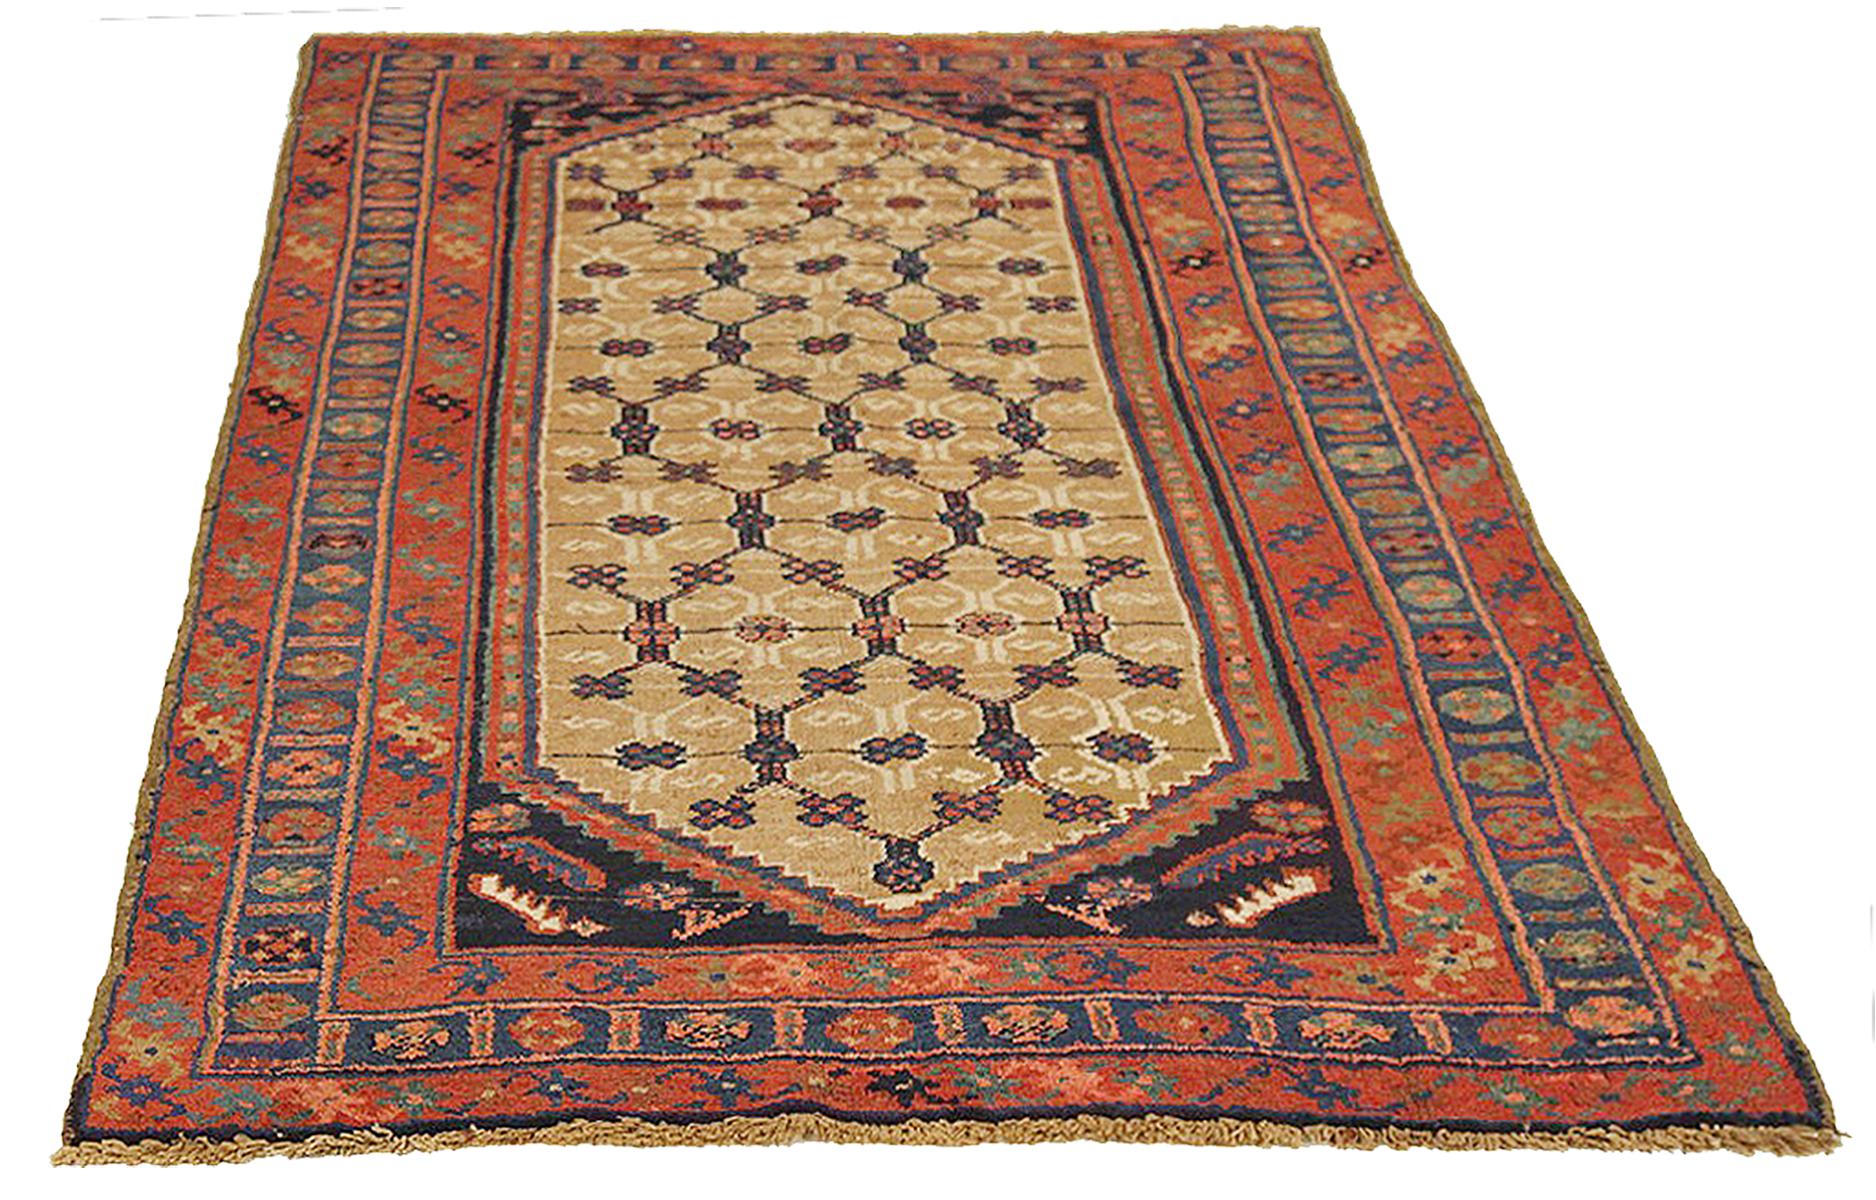 Antique Persian rug handwoven from the finest sheep’s wool and colored with all-natural vegetable dyes that are safe for humans and pets. It’s a traditional Hamedan design featuring floral patterns in bold colors of red and navy over a beige field.